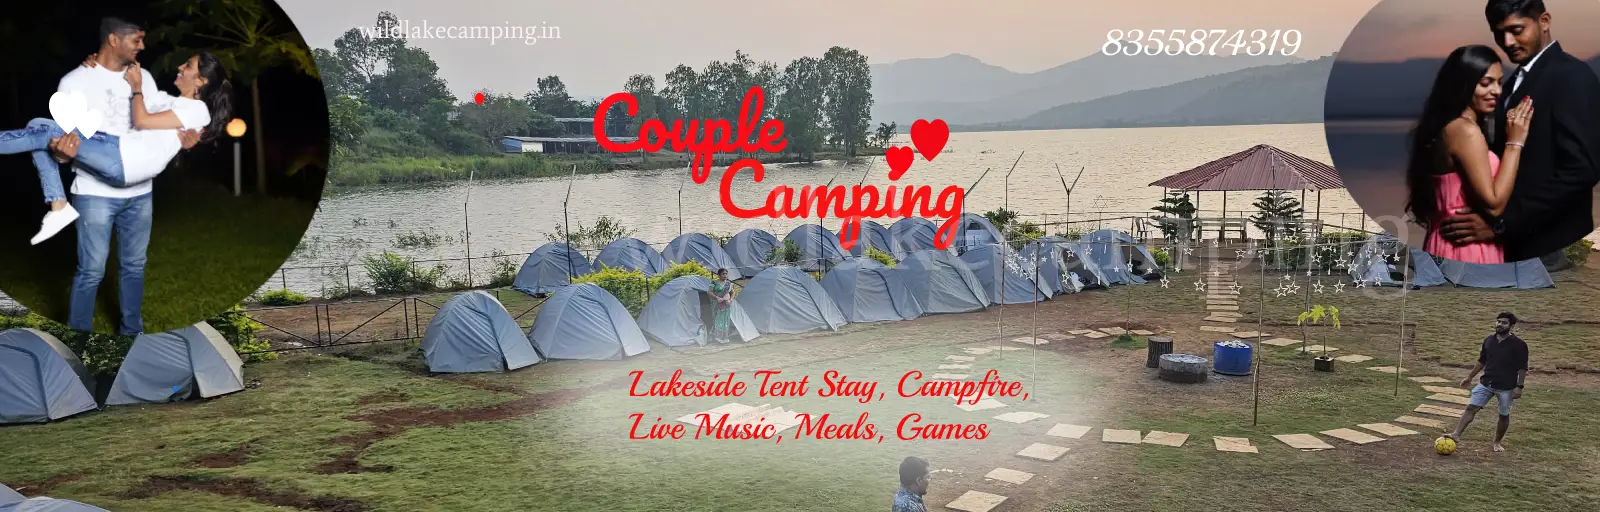 Best Camping for Couples near pawna